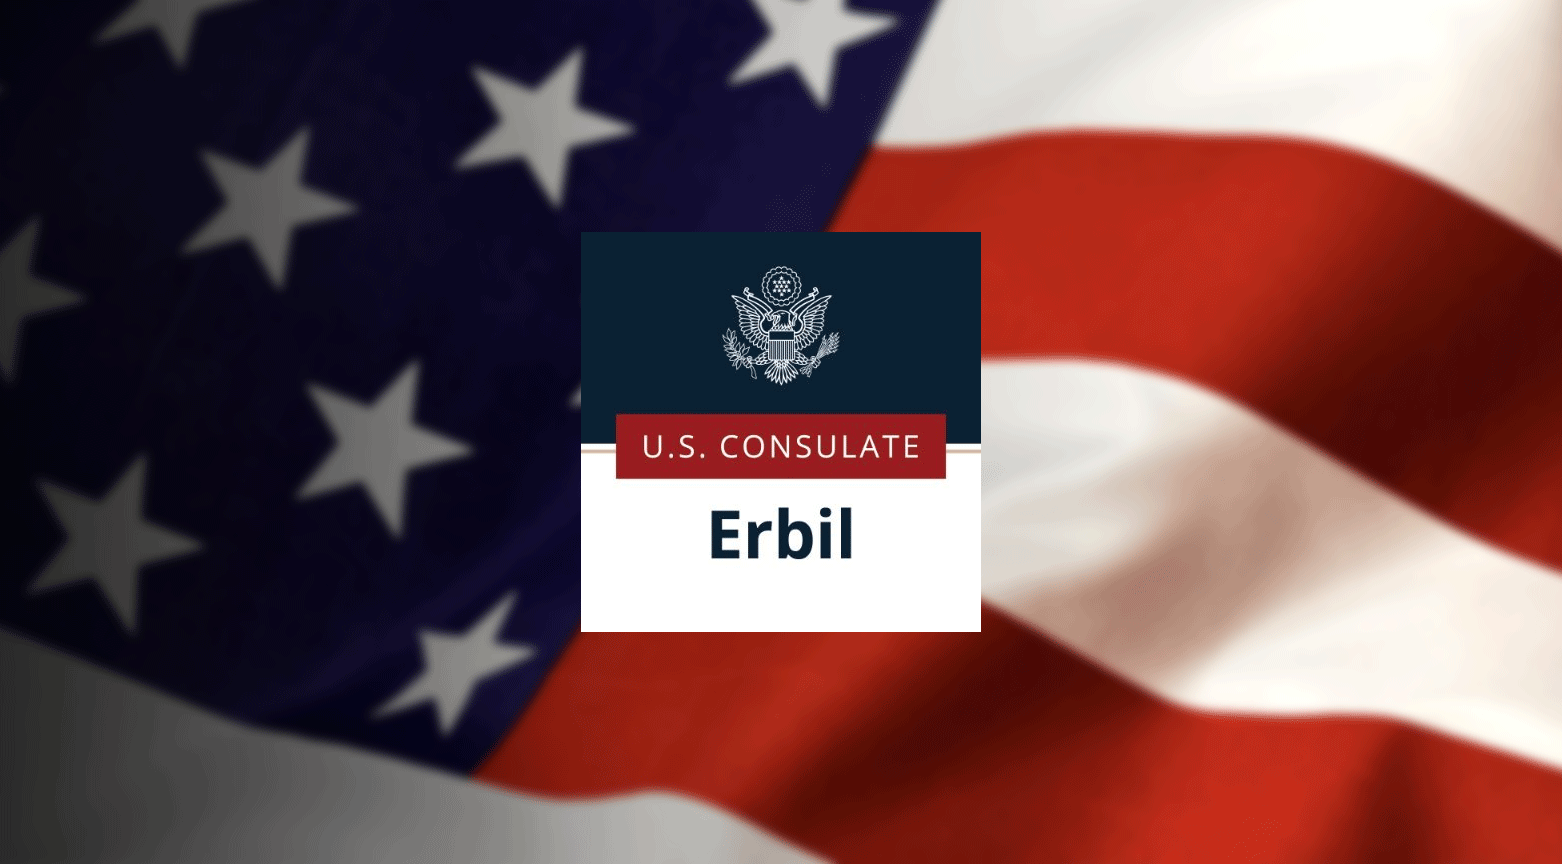 The logo of the US General Consulate in Erbil. (Photo: Designed by Kurdistan 24)